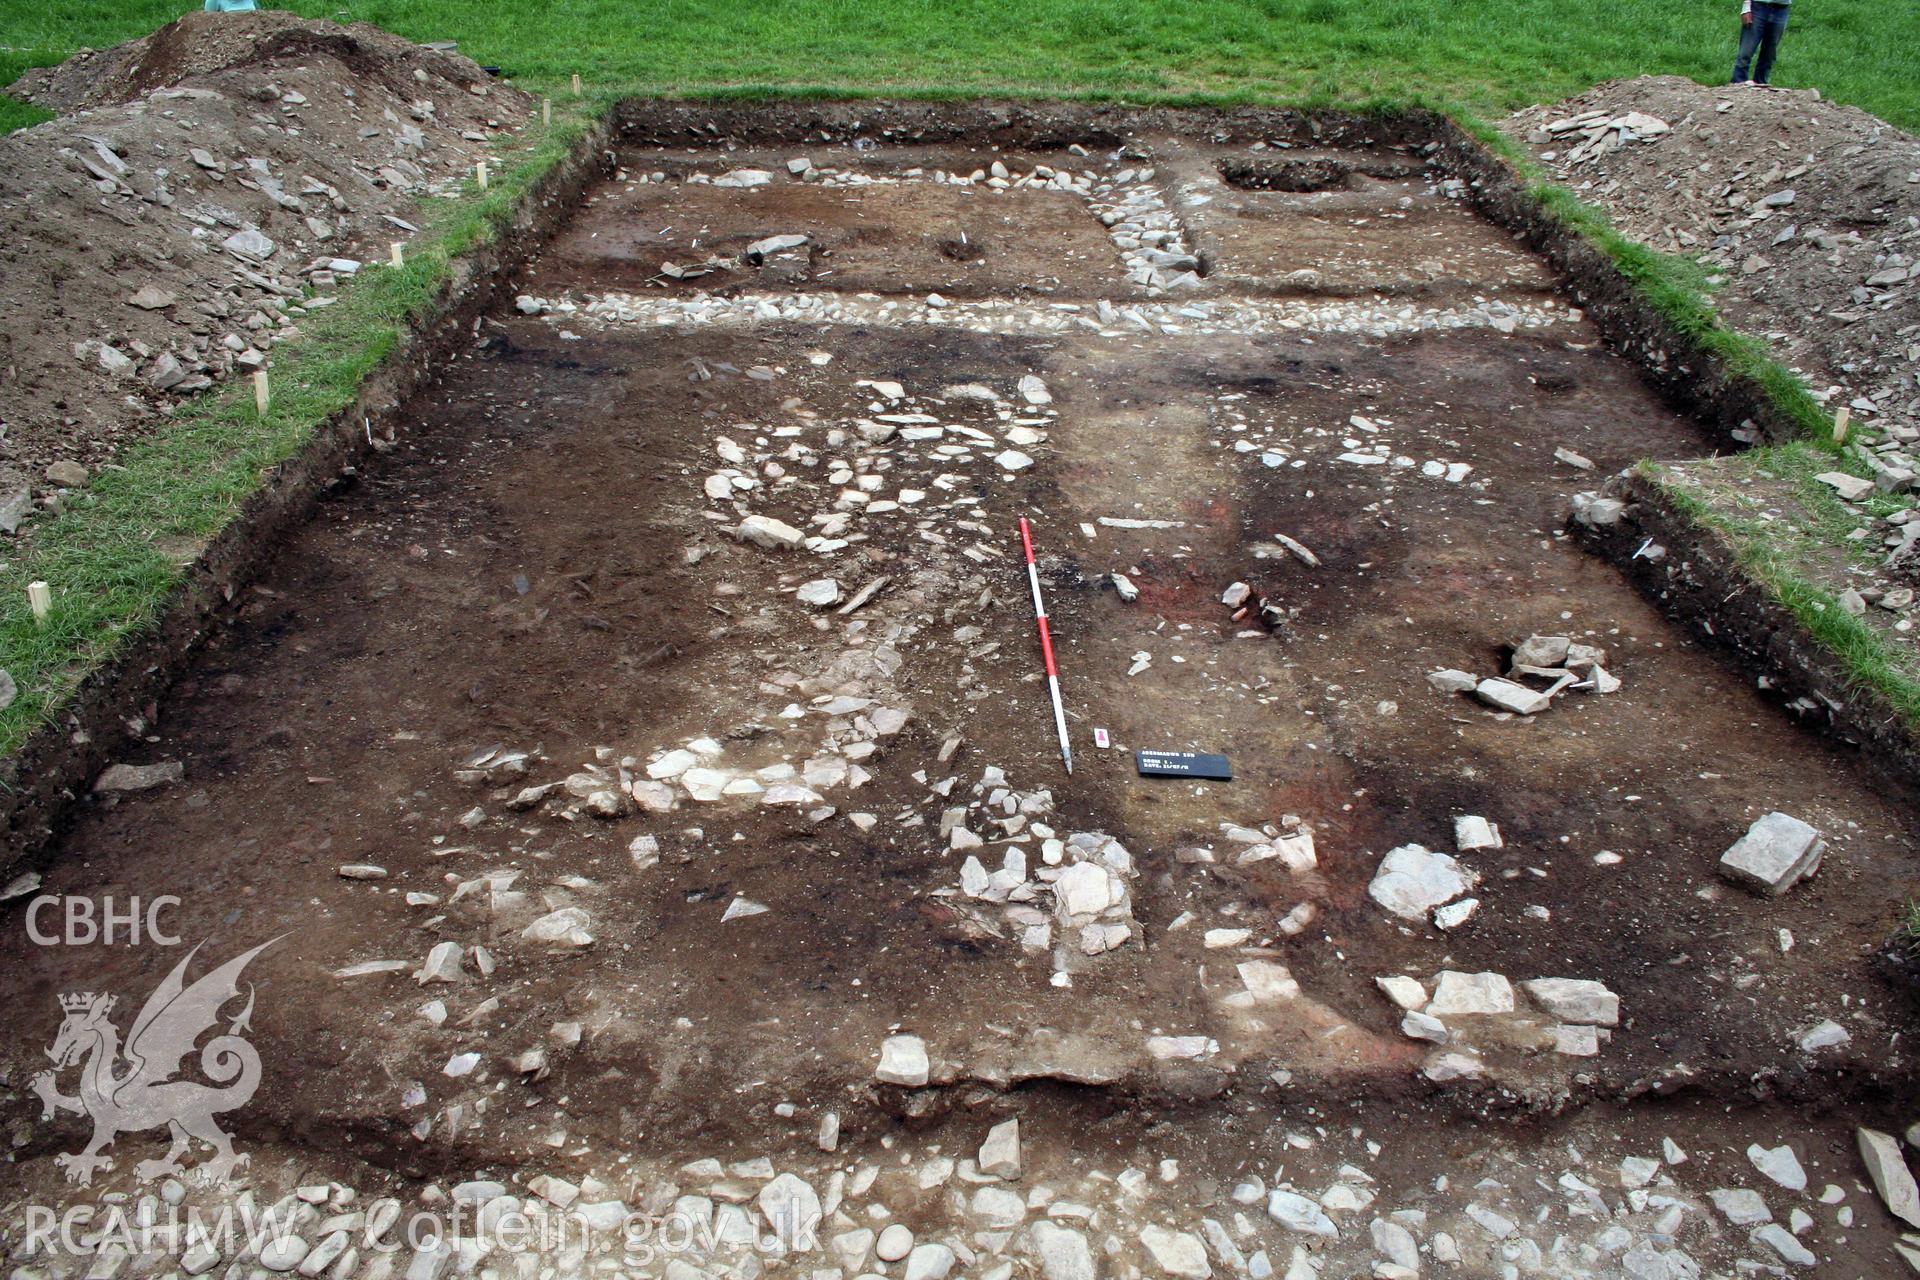 Arch Camb 167 (2018) 143-219. "The Romano-British villa at Abermagwr, Ceredigion: excavations 2010-2015" by Davies and Driver. Fig 10 room 1 and 2 during excavation viewed from south, July 2011.